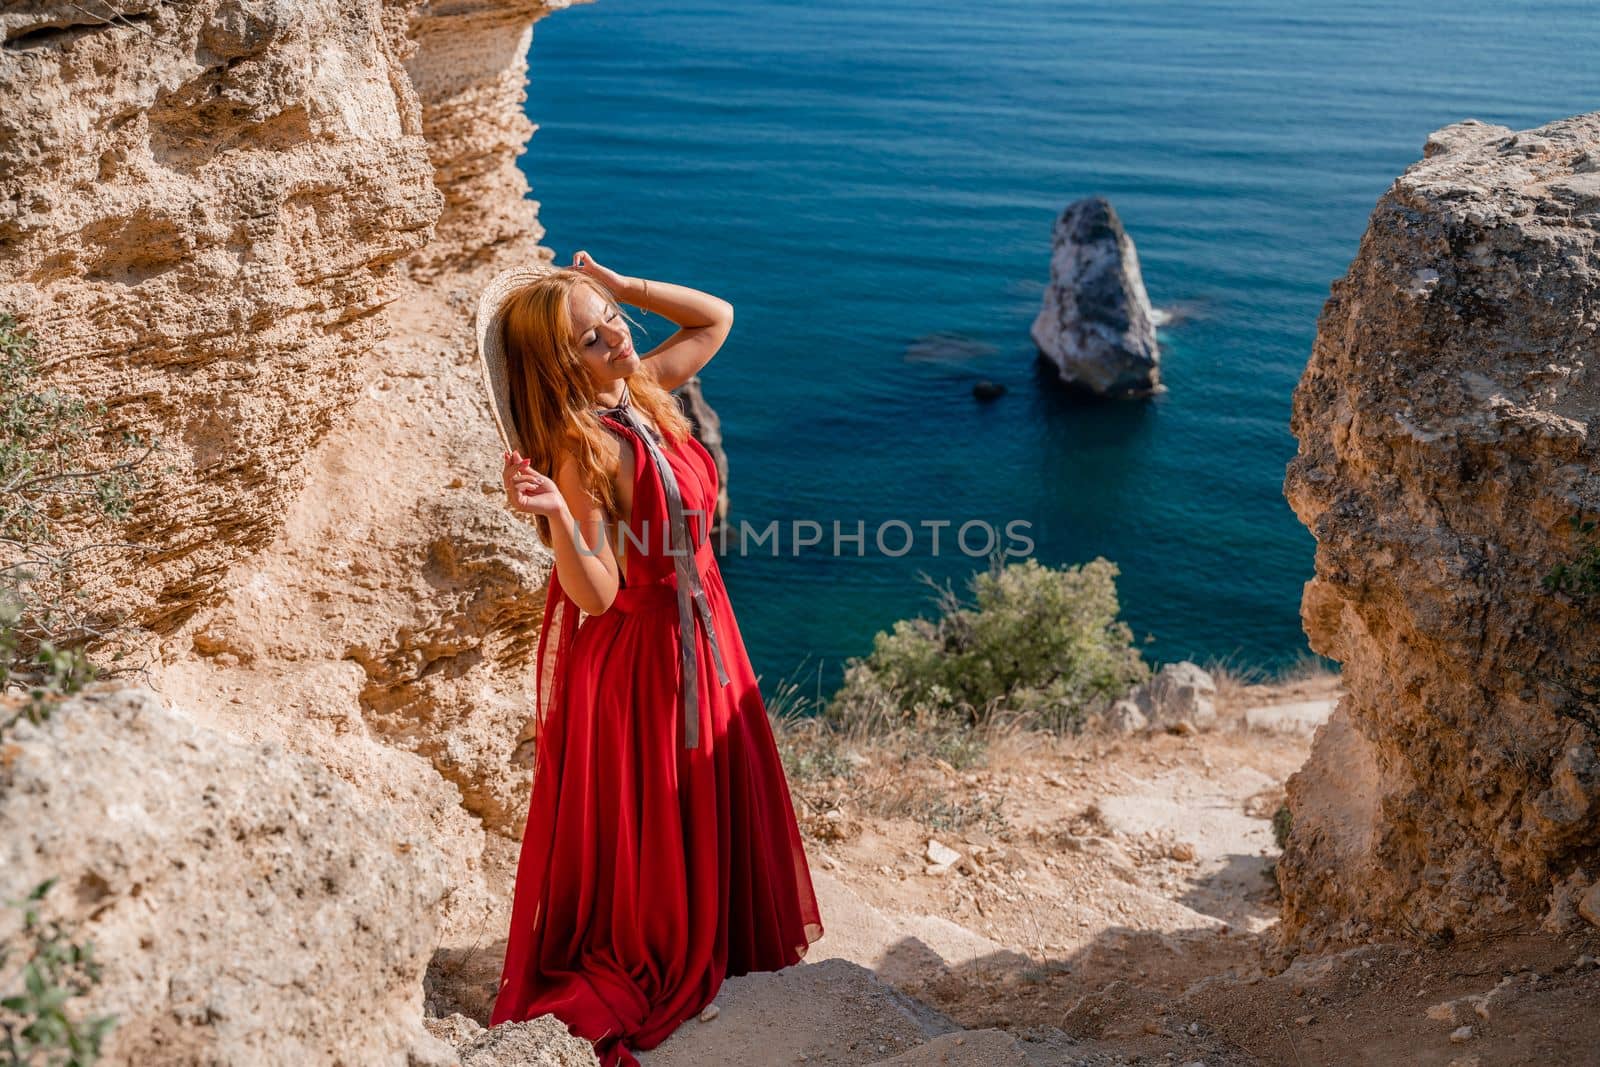 A woman in a flying red dress fluttering in the wind and a straw hat against the backdrop of the sea